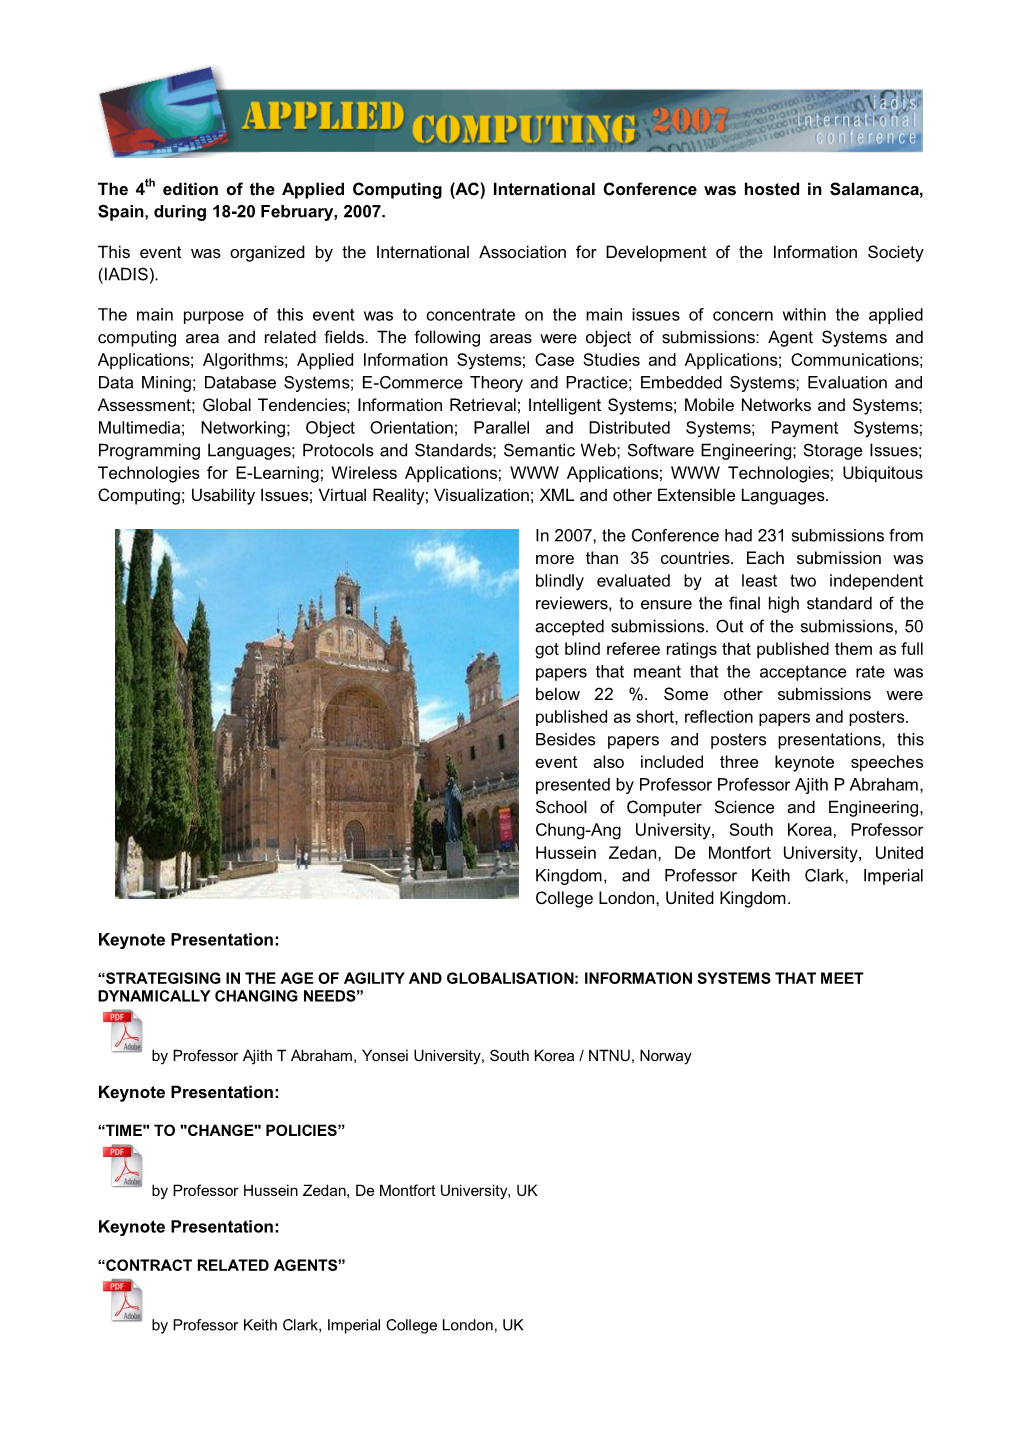 The 4Th Edition of the Applied Computing (AC) International Conference Was Hosted in Salamanca, Spain, During 18-20 February, 2007